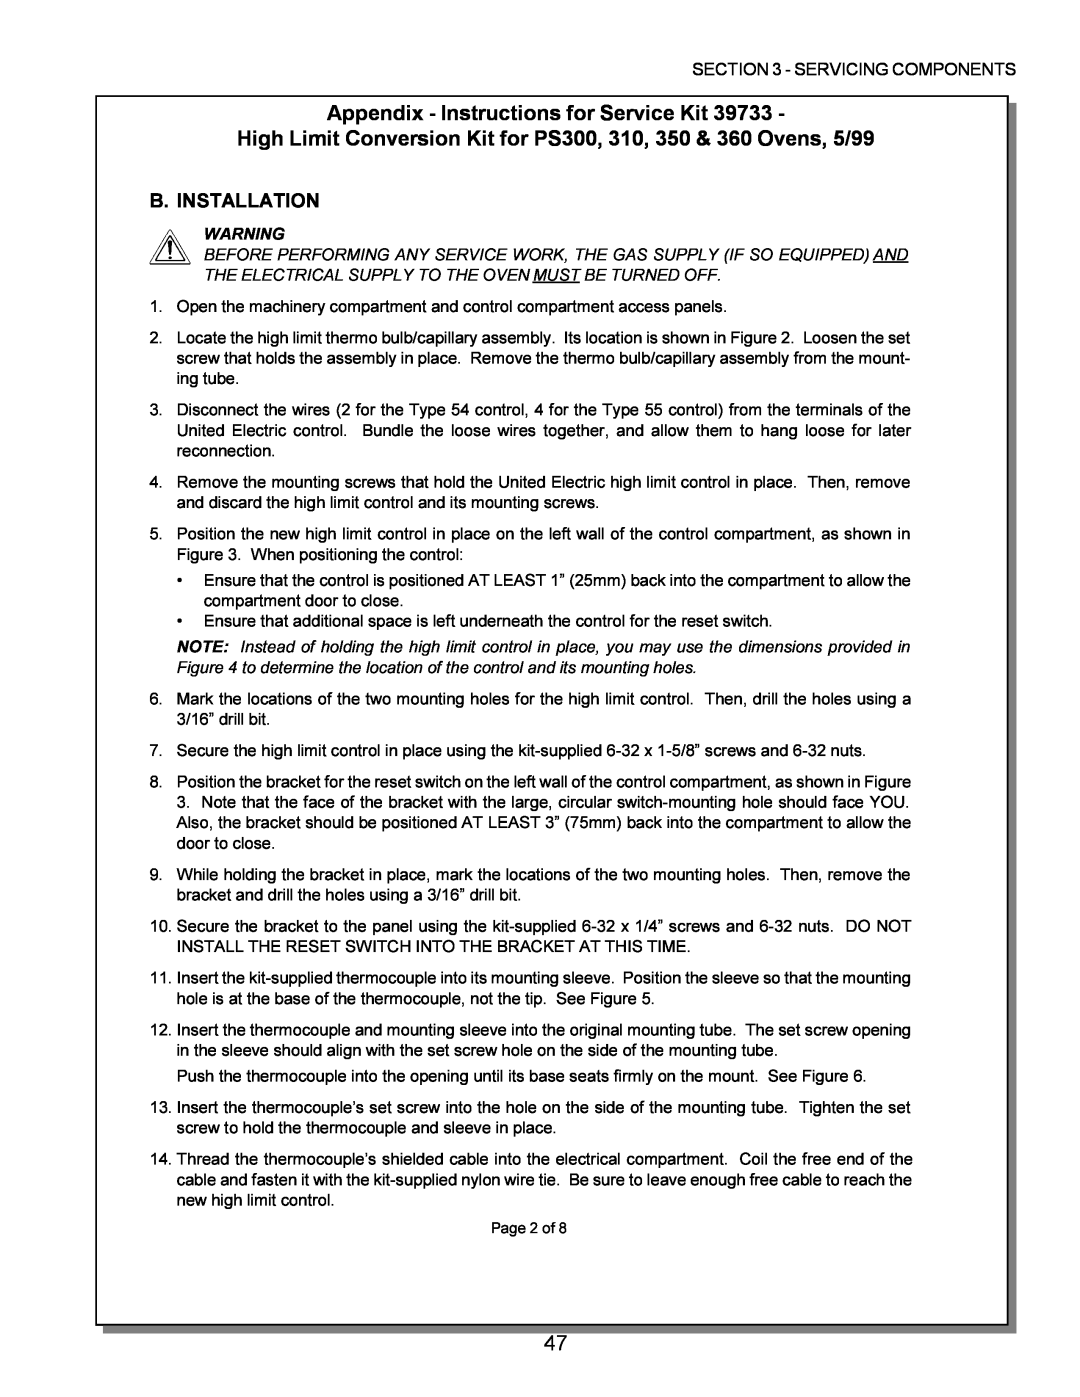 Middleby Marshall PS570, PS360, PS200, PS555, PS220 manual Appendix - Instructions for Service Kit, B. Installation, Page 2 of 